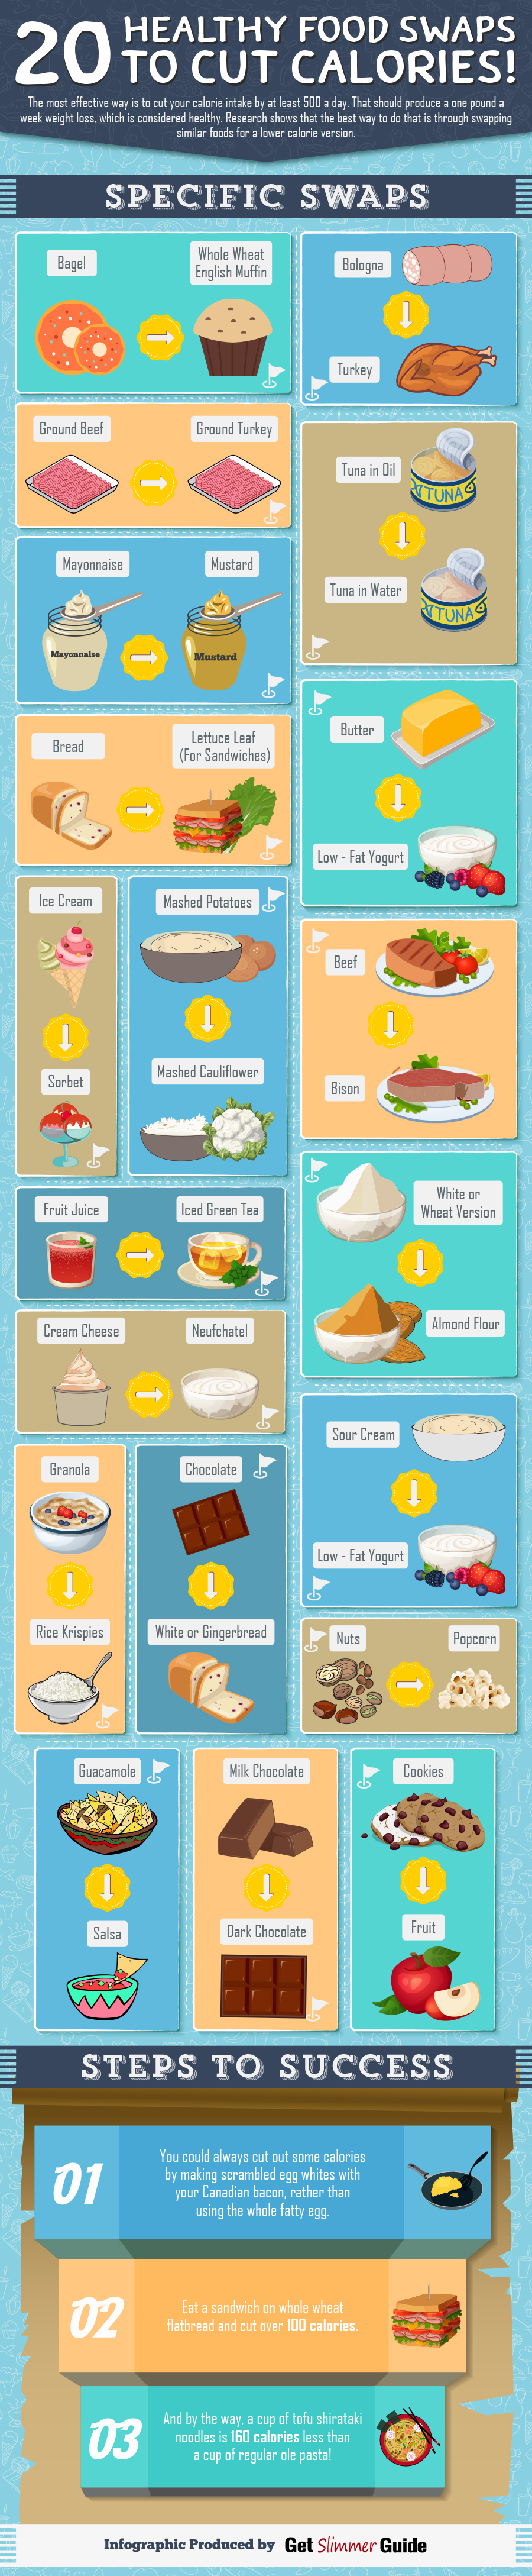 Healthy Food Swaps to Cut Calories Infographic